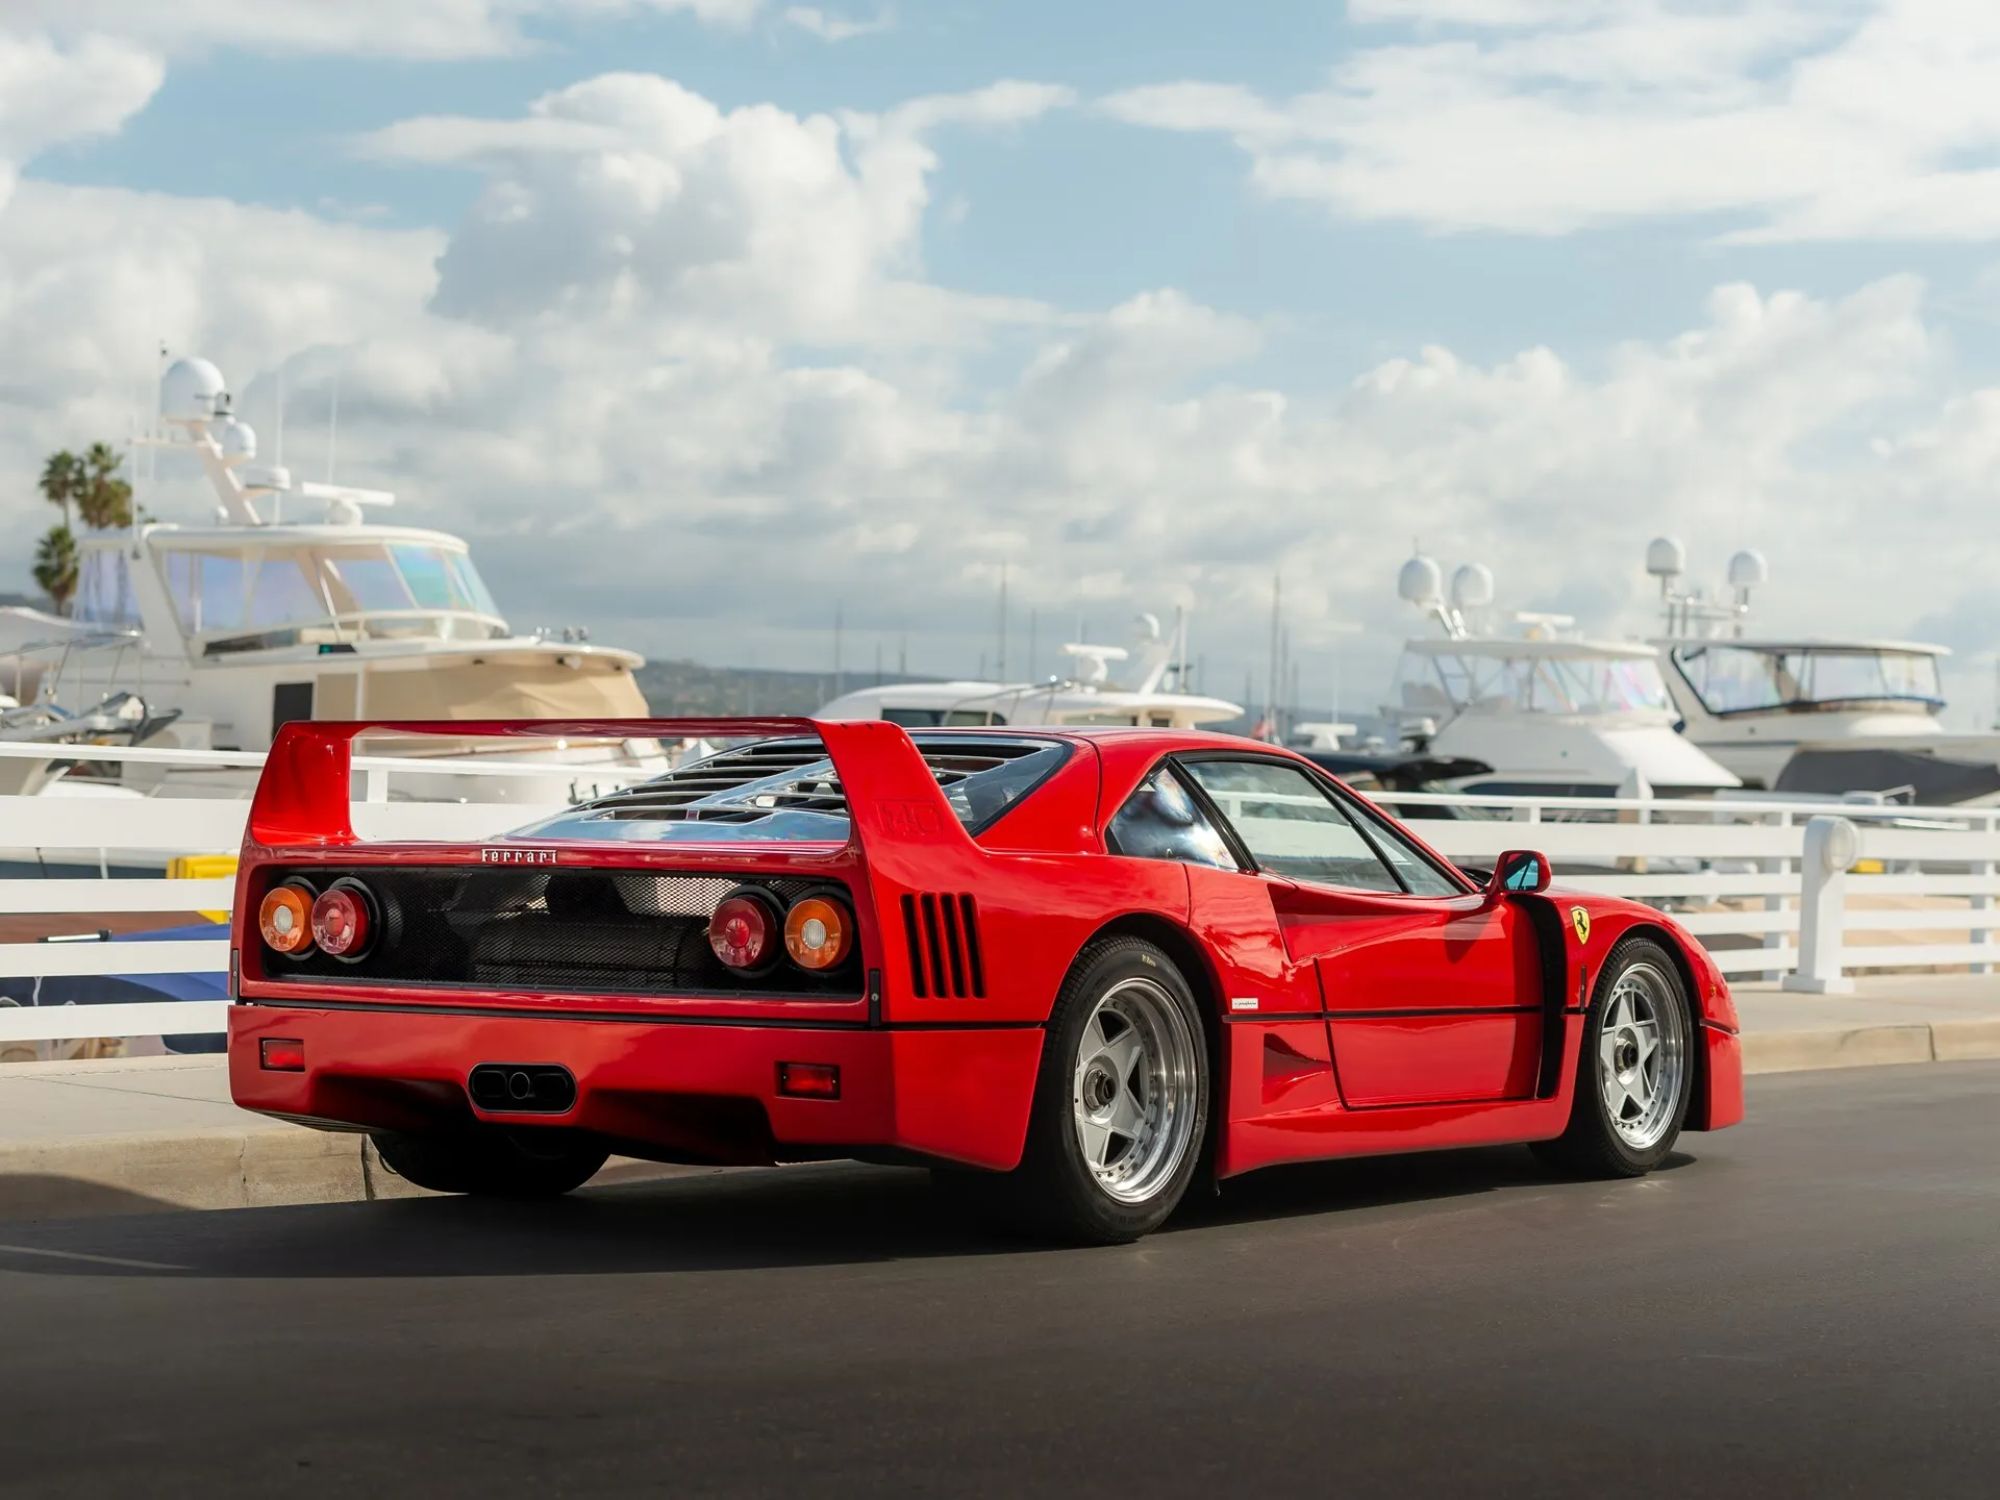 Exemplary 1992 Ferrari F40 Can Be an Excellent Addition to Any Car ...